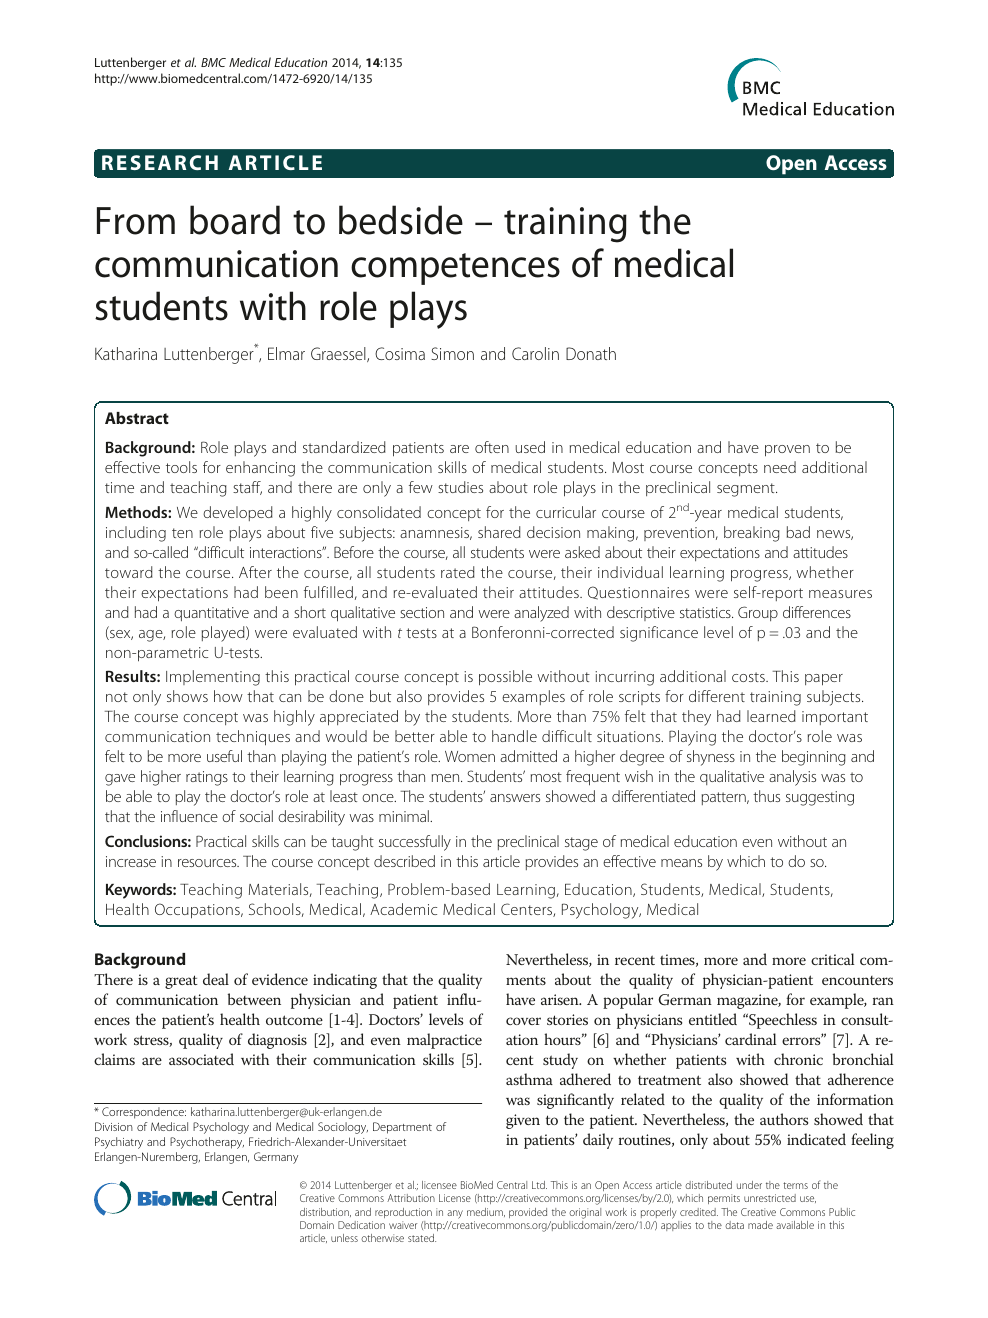 Laag douche Uitrusten From board to bedside – training the communication competences of medical  students with role plays – topic of research paper in Educational sciences.  Download scholarly article PDF and read for free on